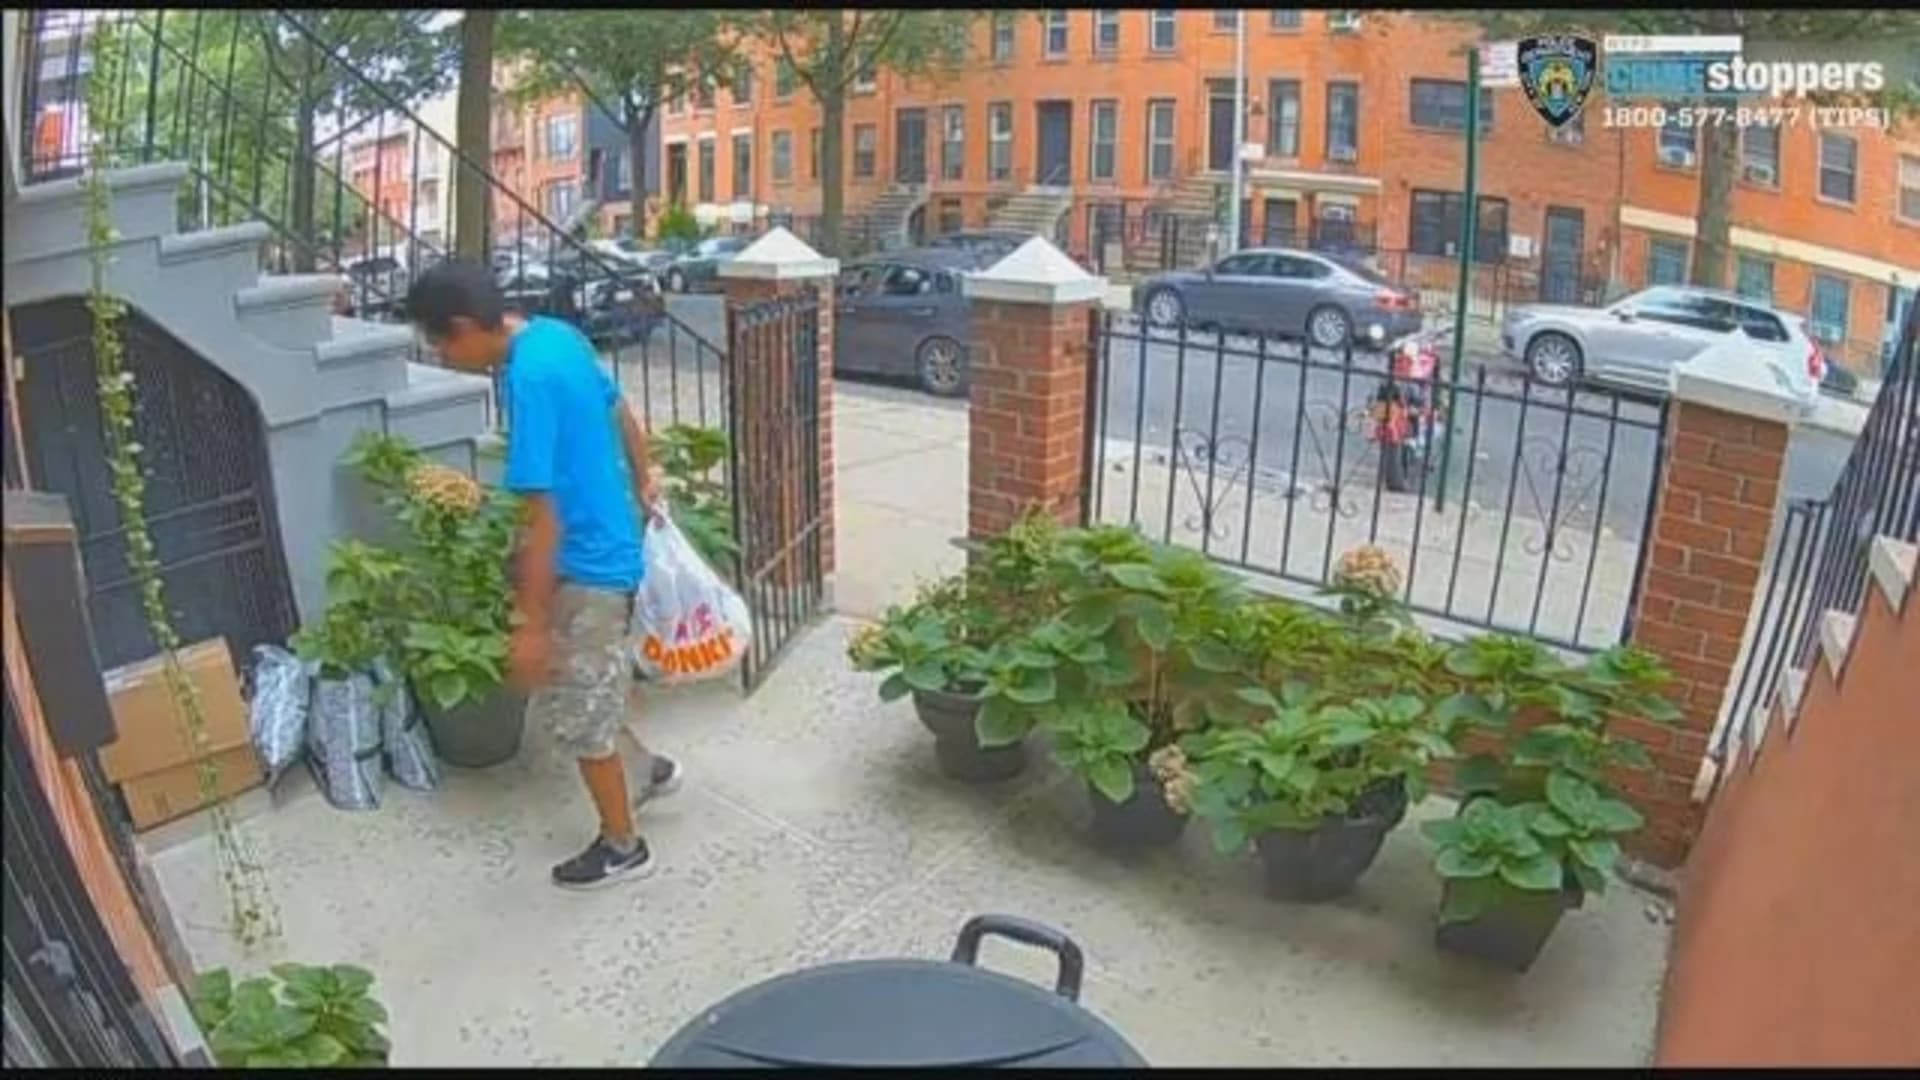 Police: Suspect wanted for stealing packages in Bushwick